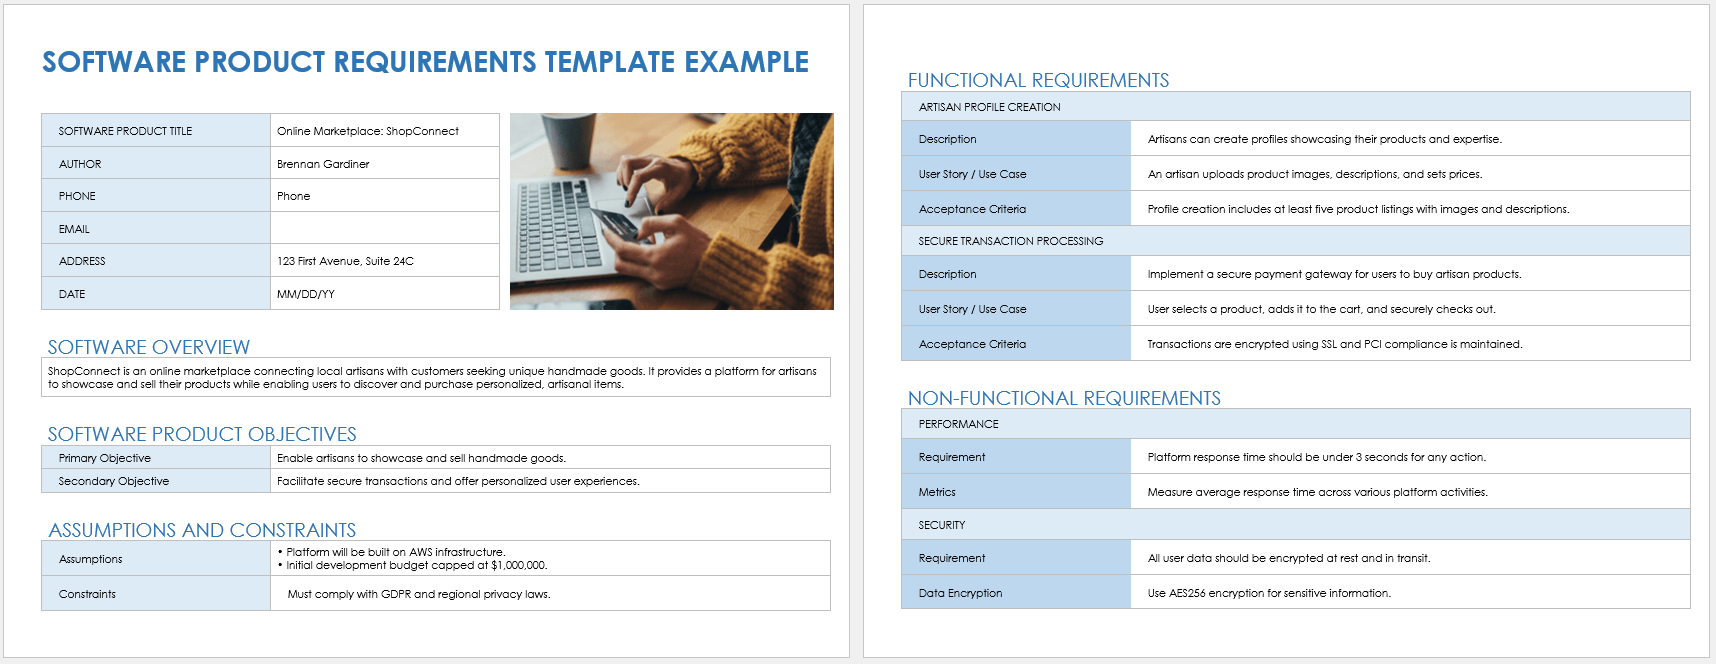 Software Product Requirement Example Template